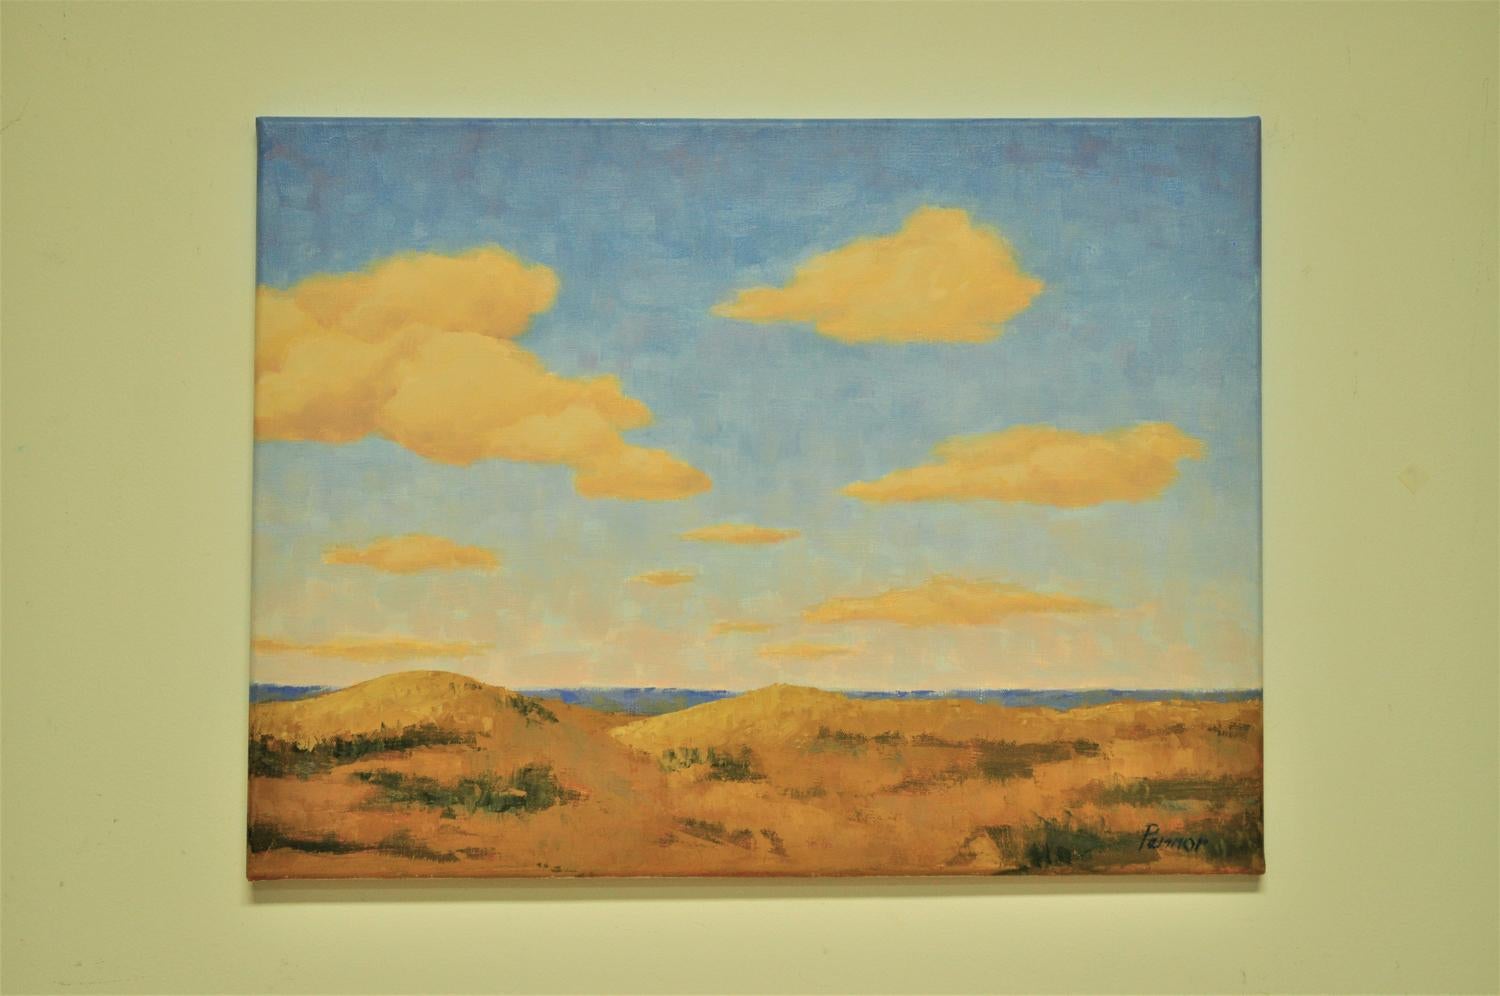 <p>Artist Comments<br />These sand dunes are next to water. They could be next to the ocean or the Great Lakes. I have lived on both coasts and now live near Lake Michigan.  The sky is also an important feature in this painting. The clouds are toned